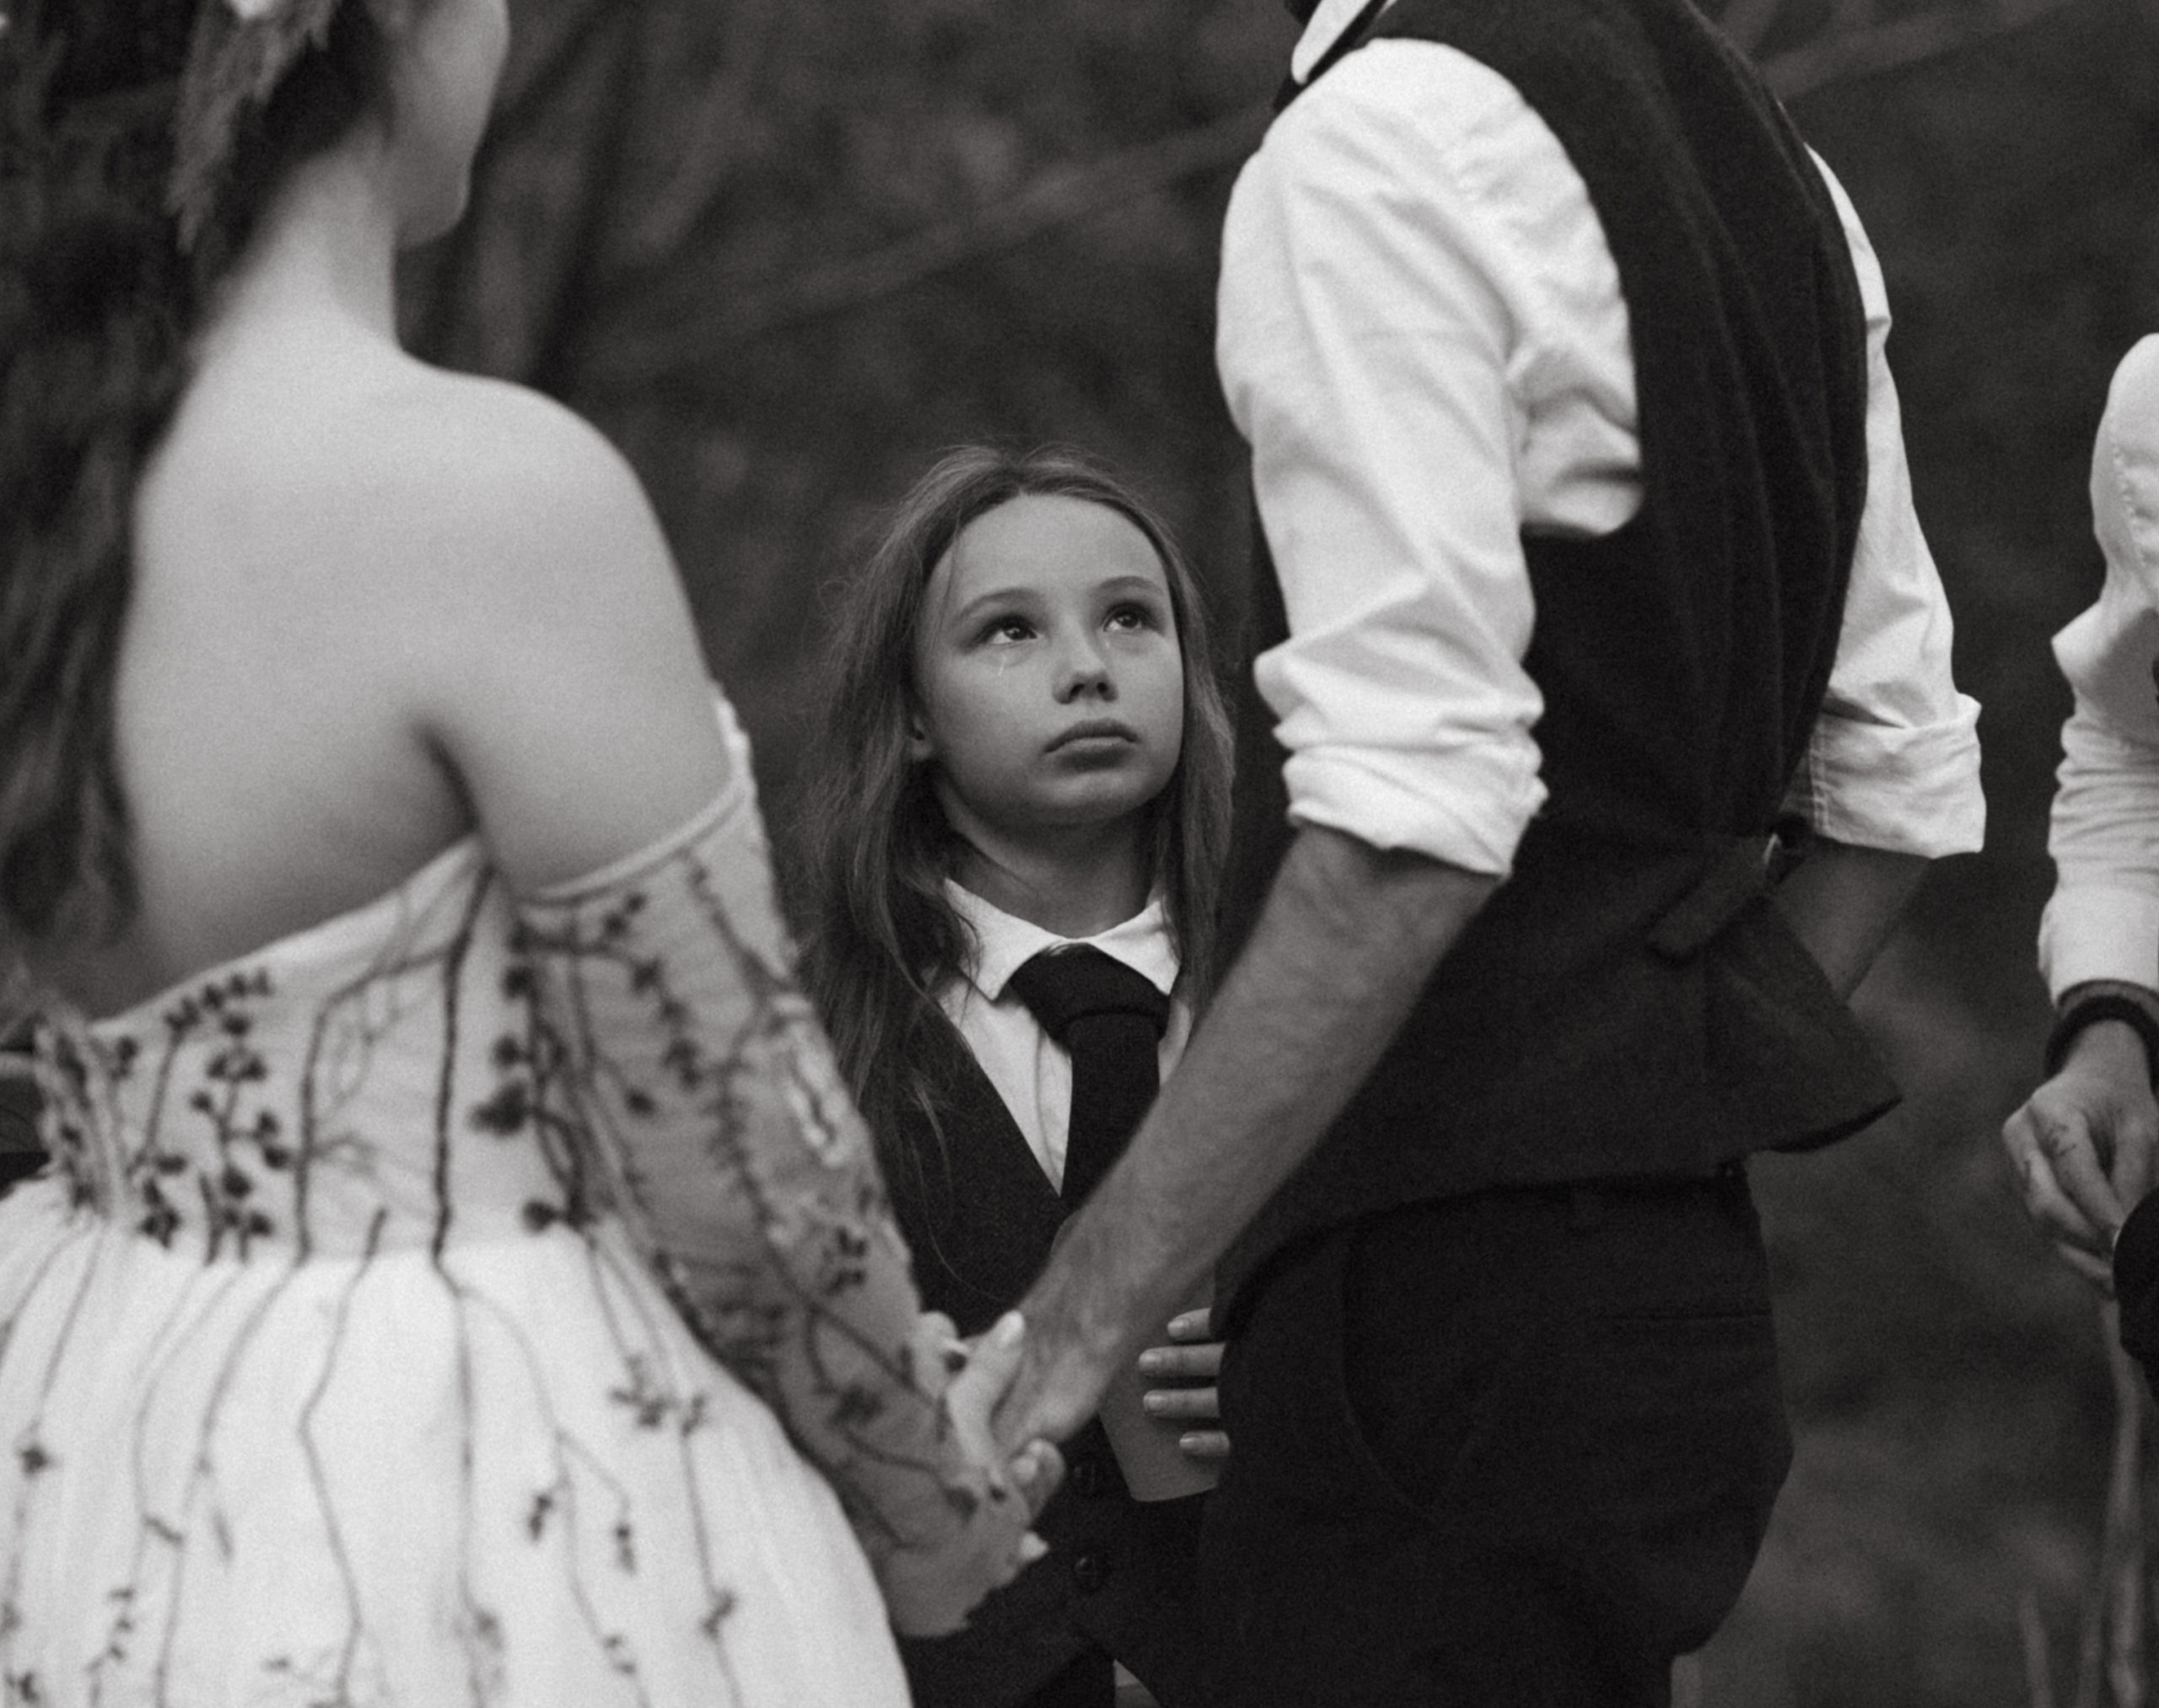 The bride's son becomes emotional at their wedding ceremony in the blue ridge mountains of North Carolina